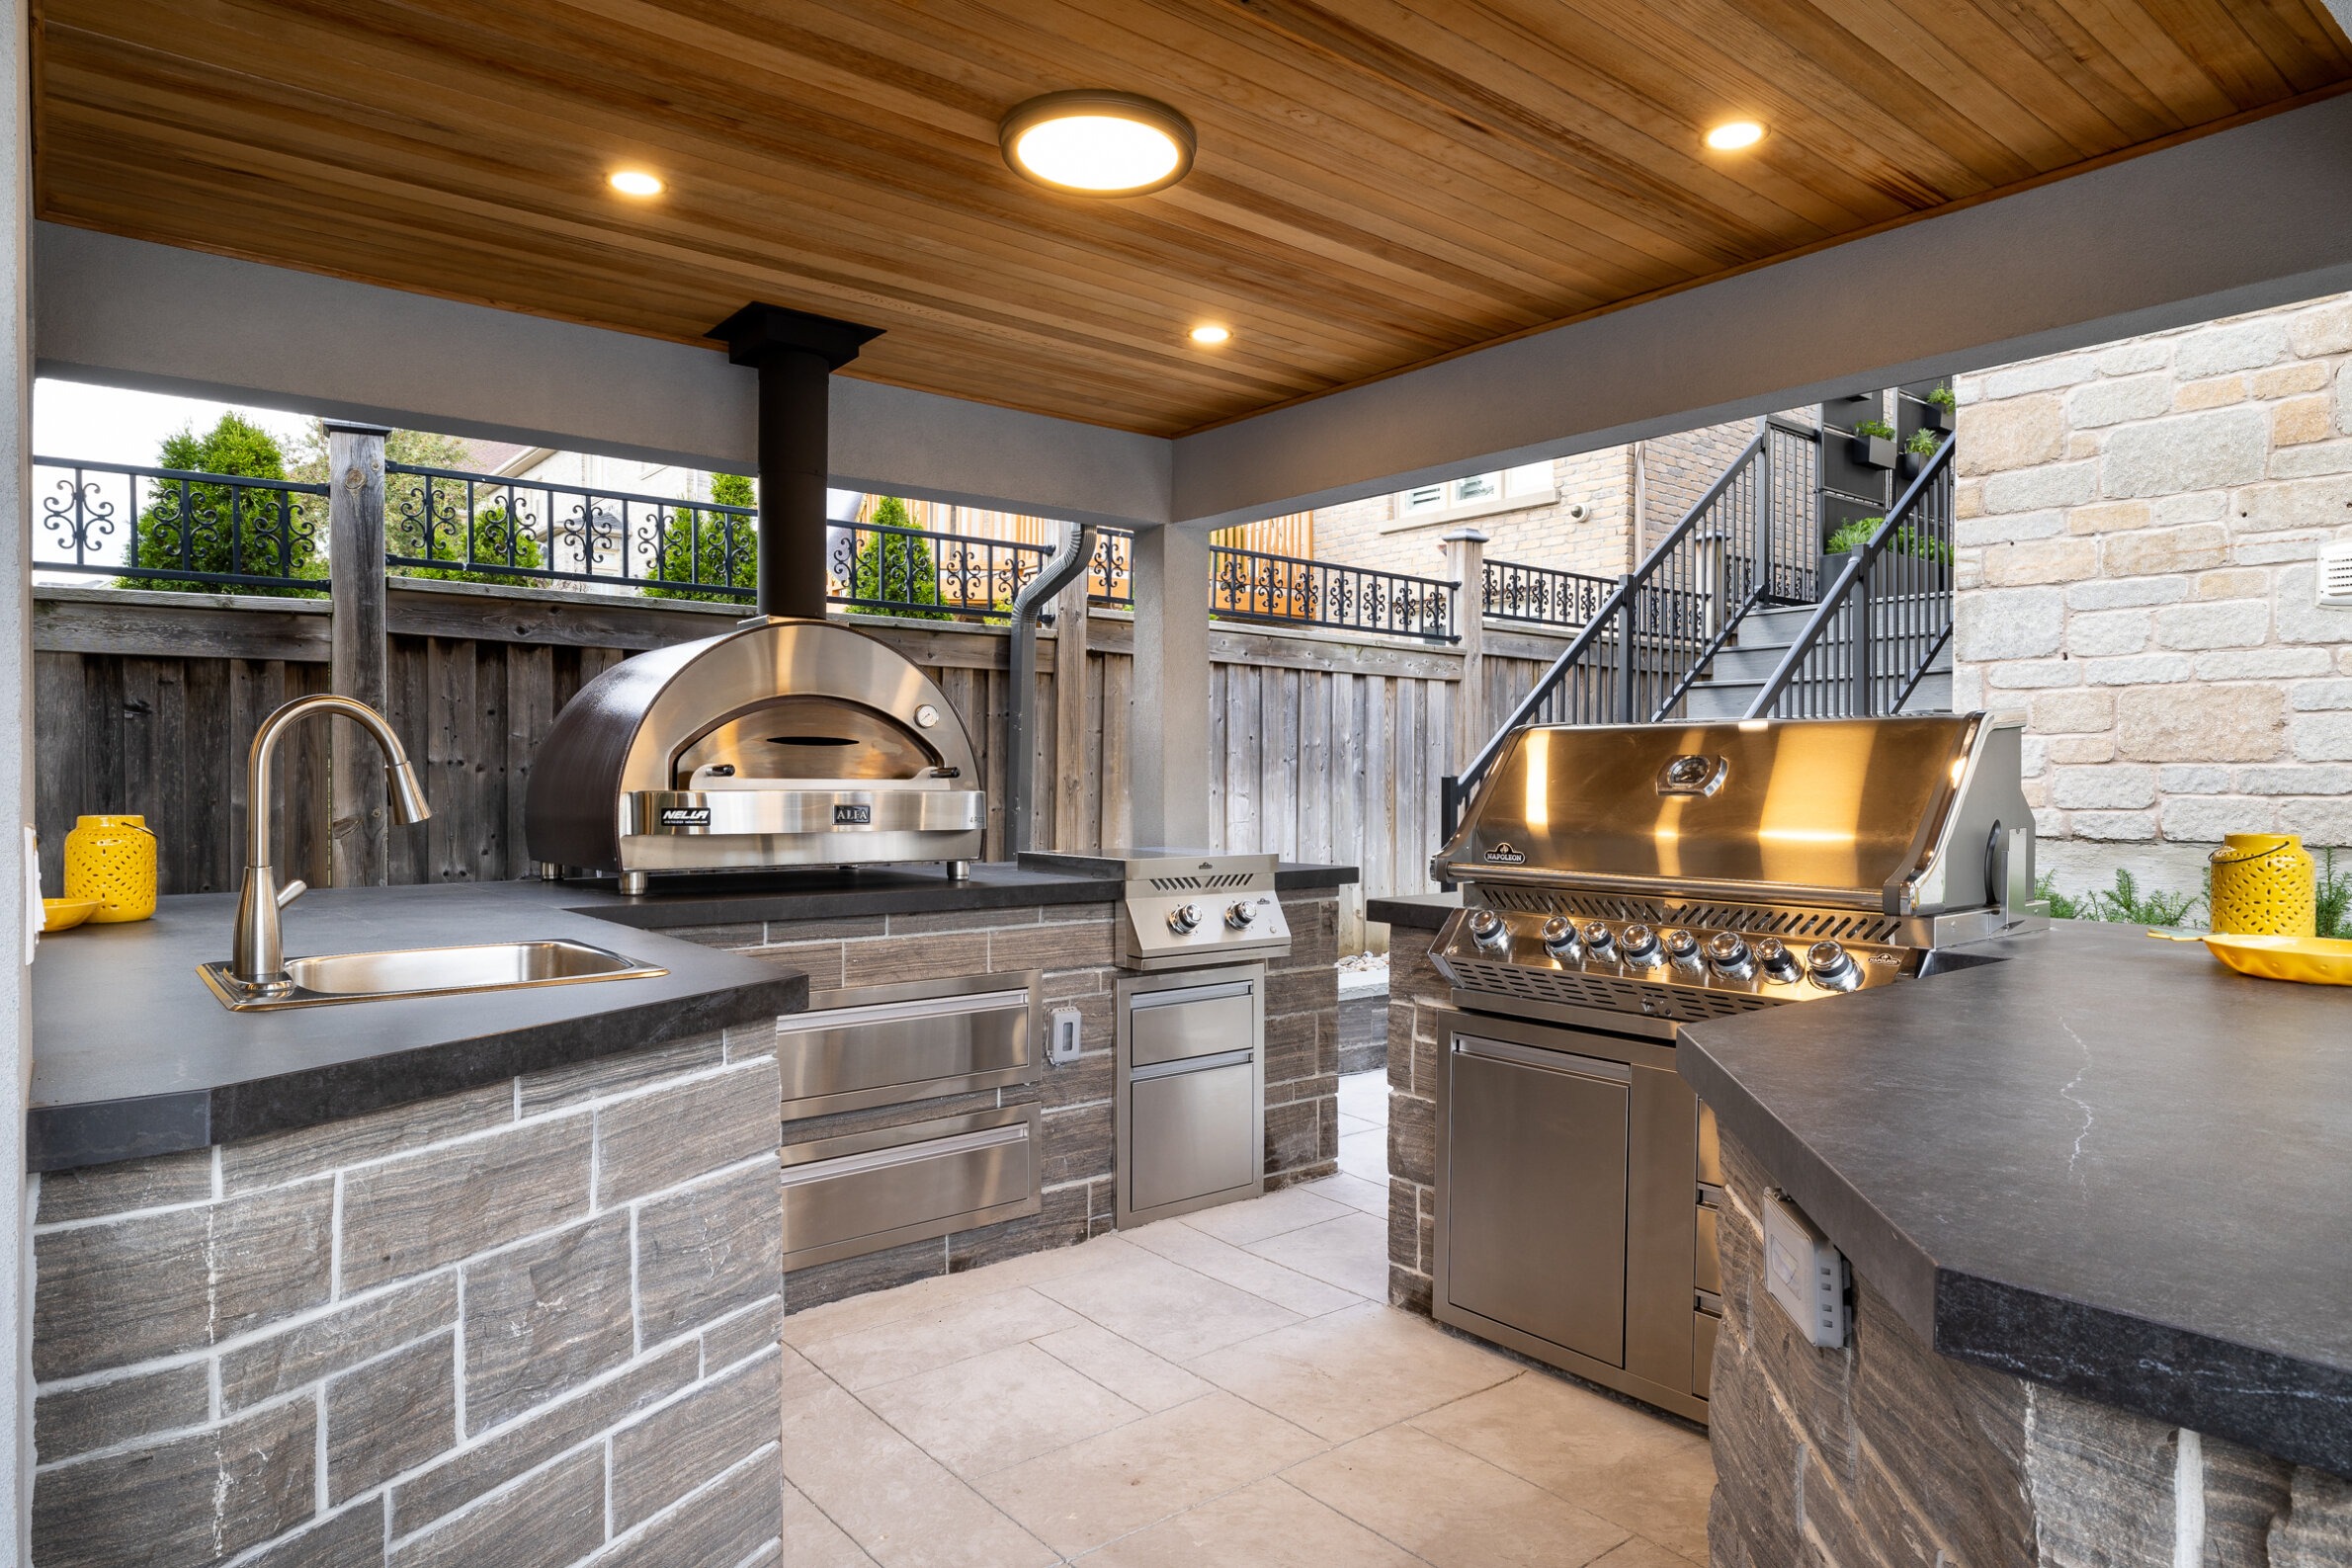 Outdoor kitchen with stainless steel appliances, pizza oven, grill, sink, and storage, under a wooden ceiling, next to a staircase and stone wall.